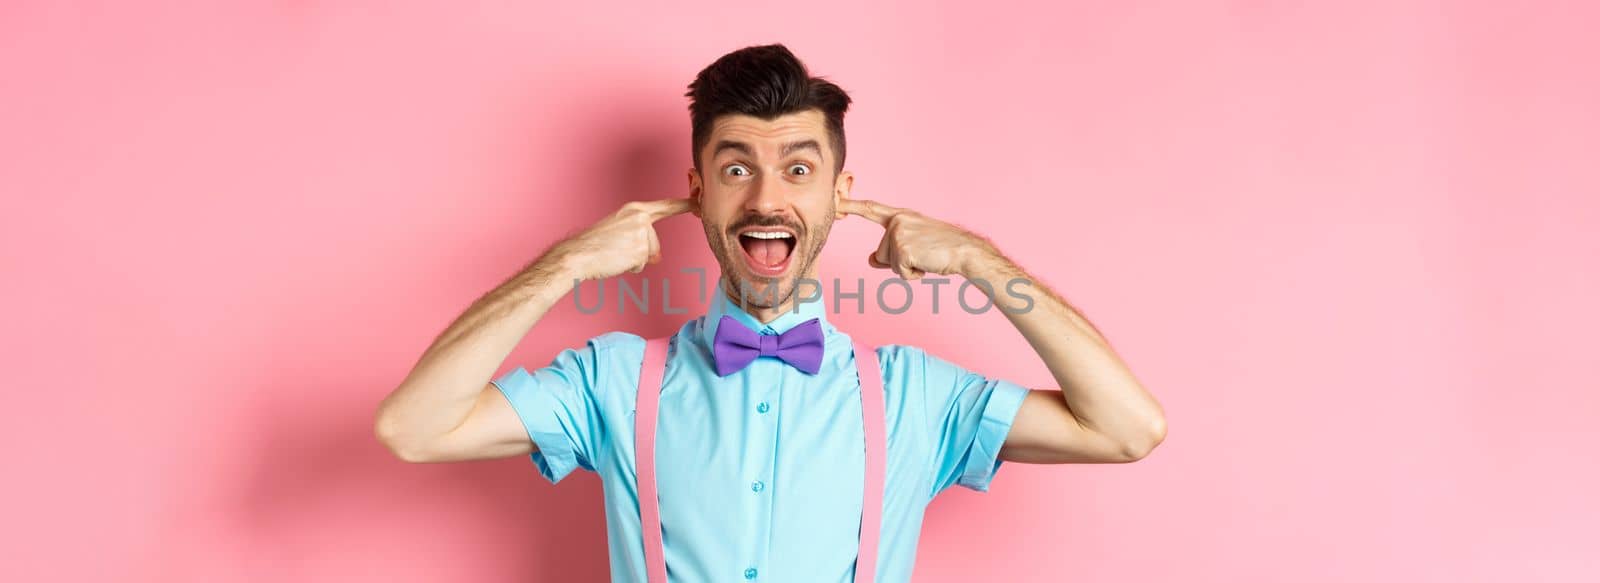 Childish funny guy shut ears and laughing at camera, refuse to listen, standing ignorant on pink background.